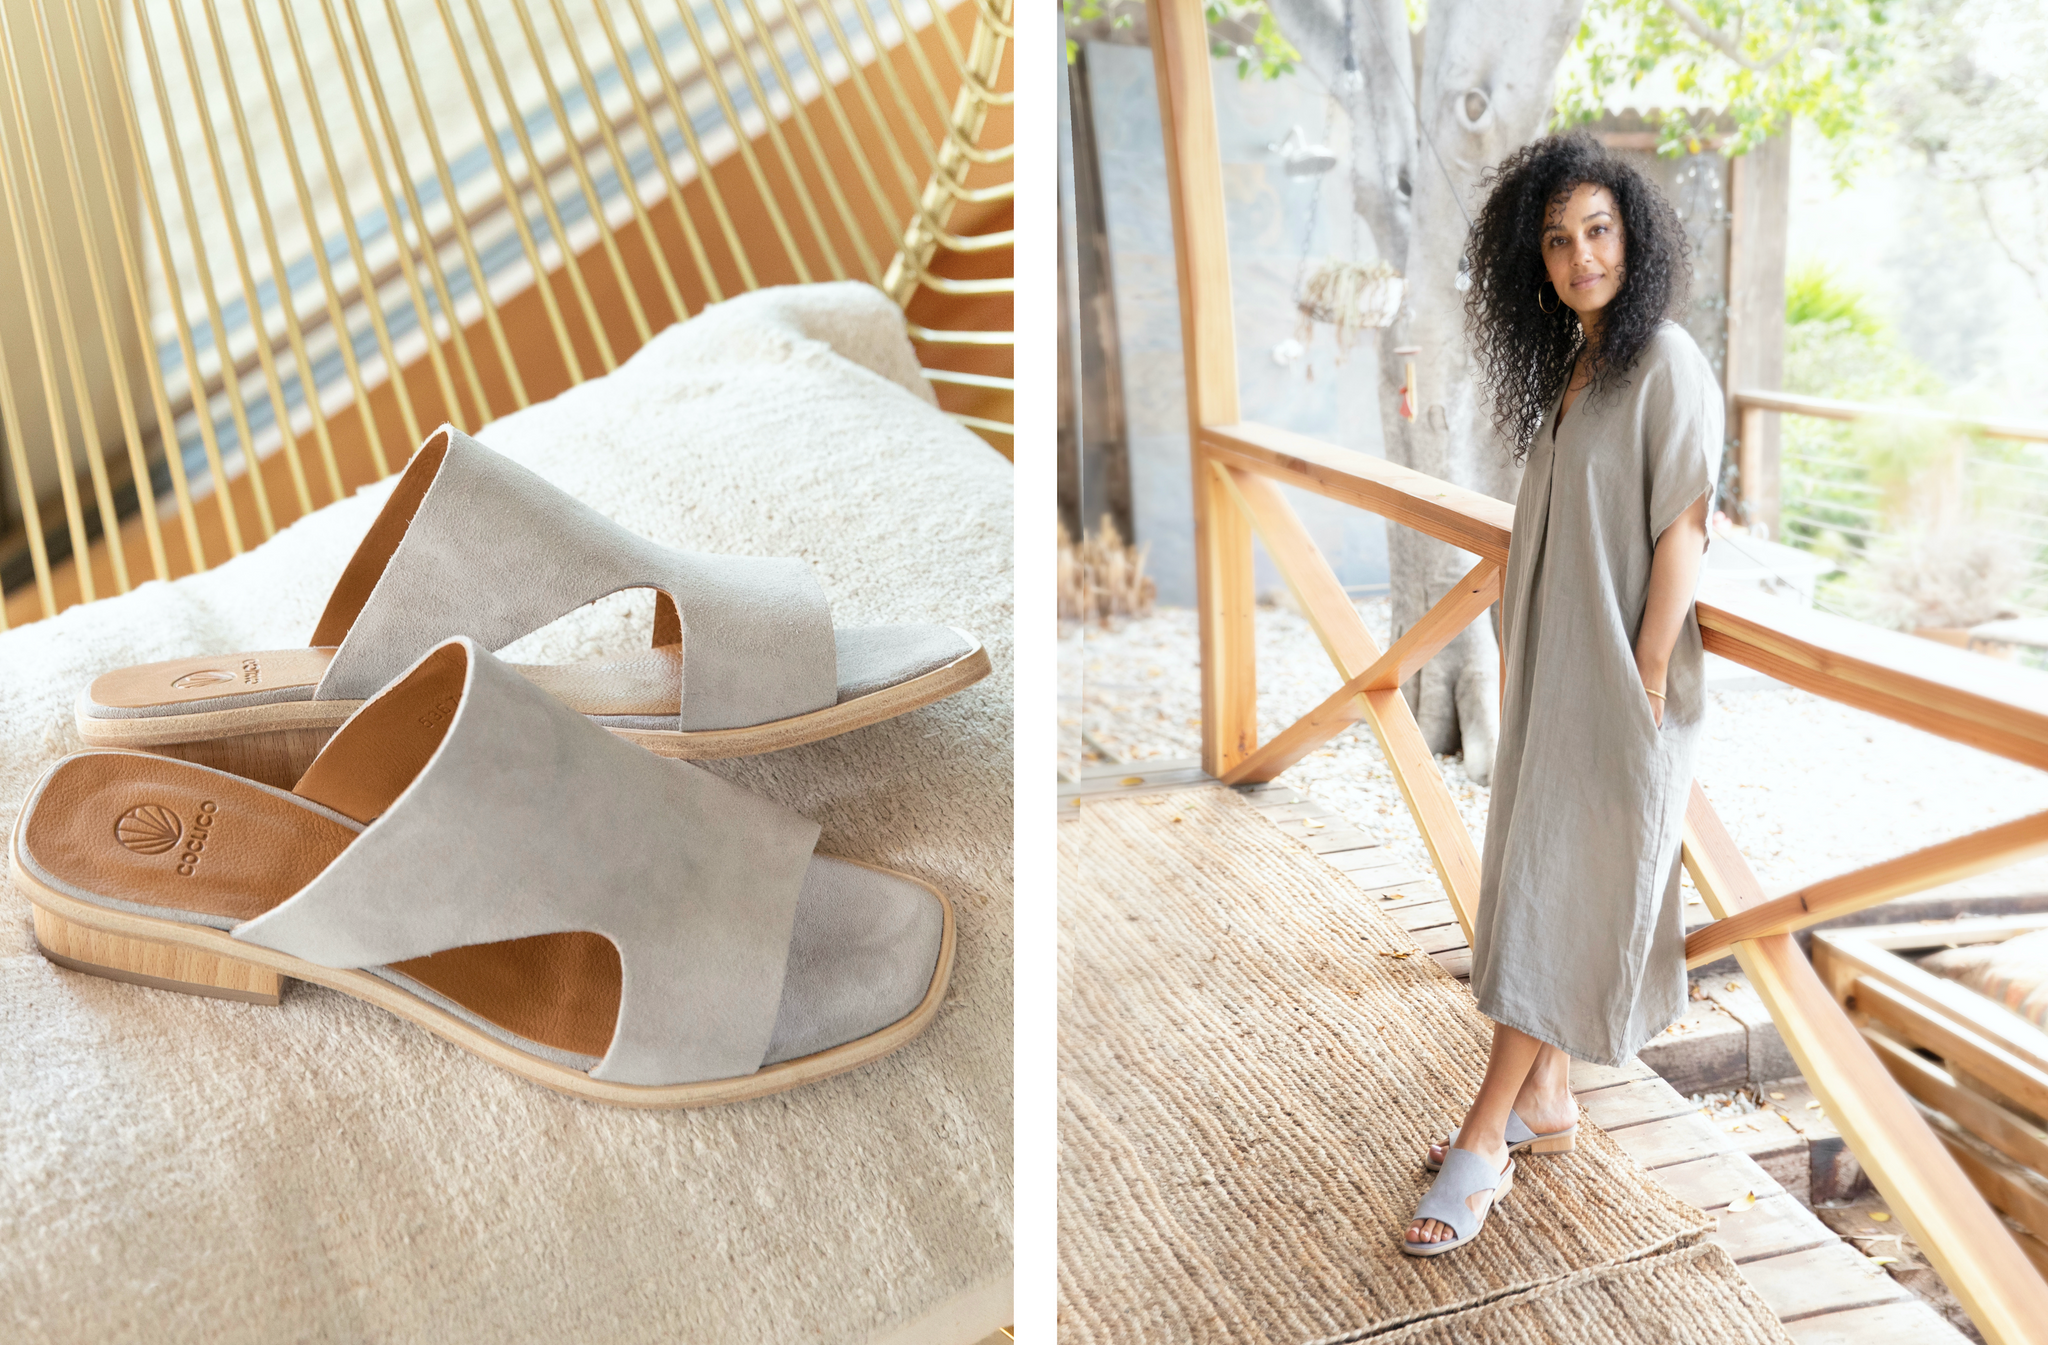 Two side-by-side images. (1) Sunlit close up of the Coclico Kamille Sandal in Tortora suede. (2) Maggi Simpkins leaning on a wooden railing sporting the Kamille sandals. 